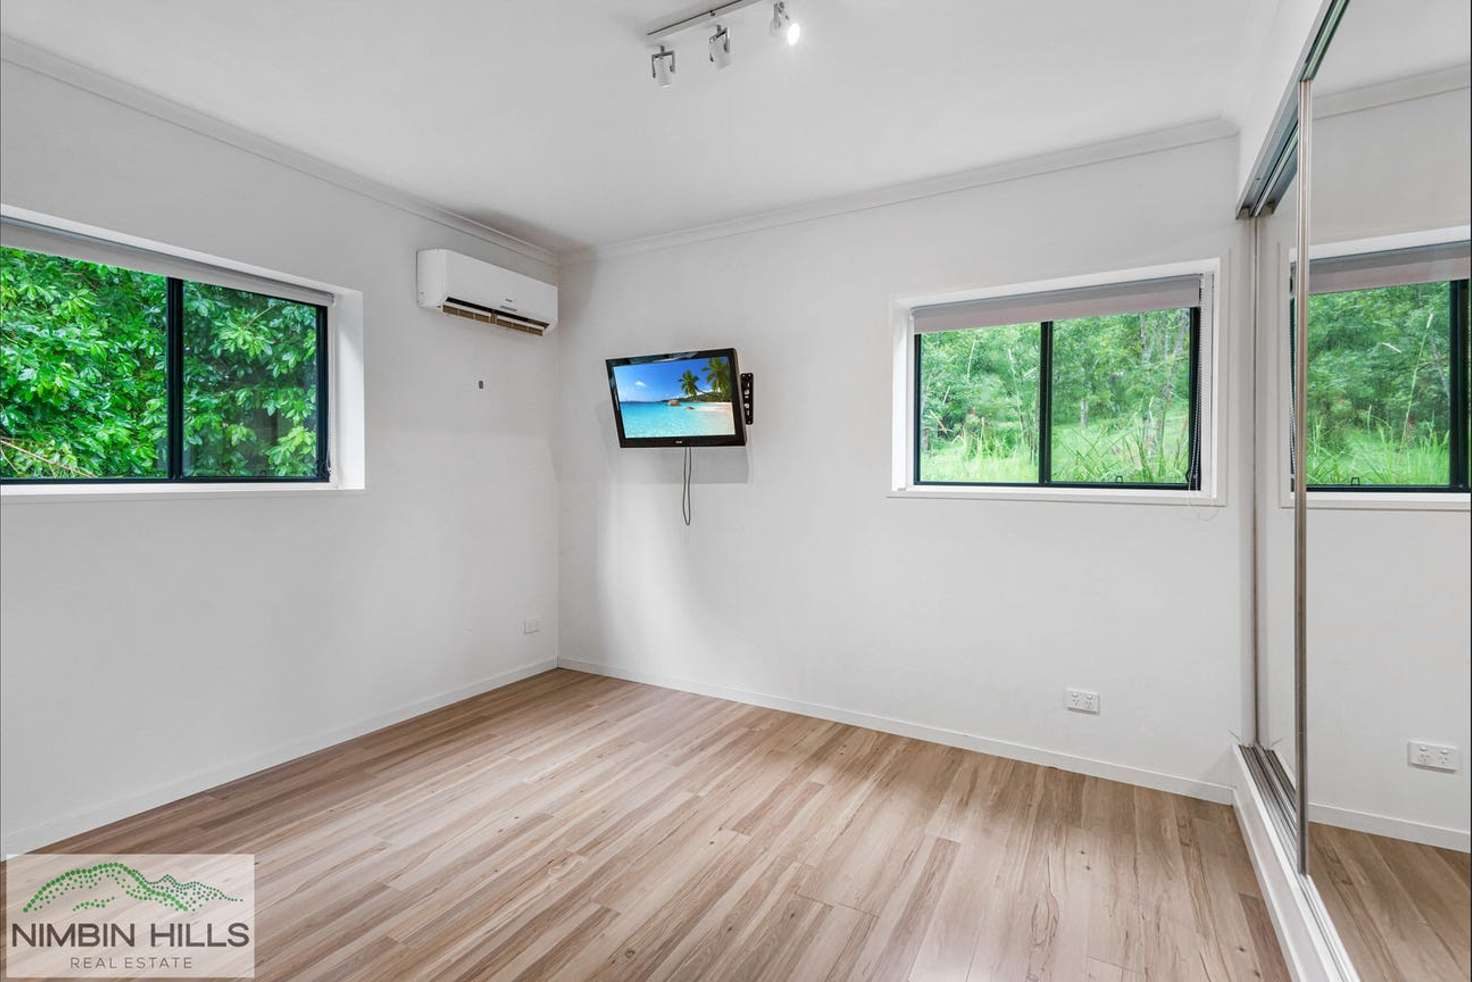 Main view of Homely studio listing, 9 Cecil Street, Nimbin NSW 2480